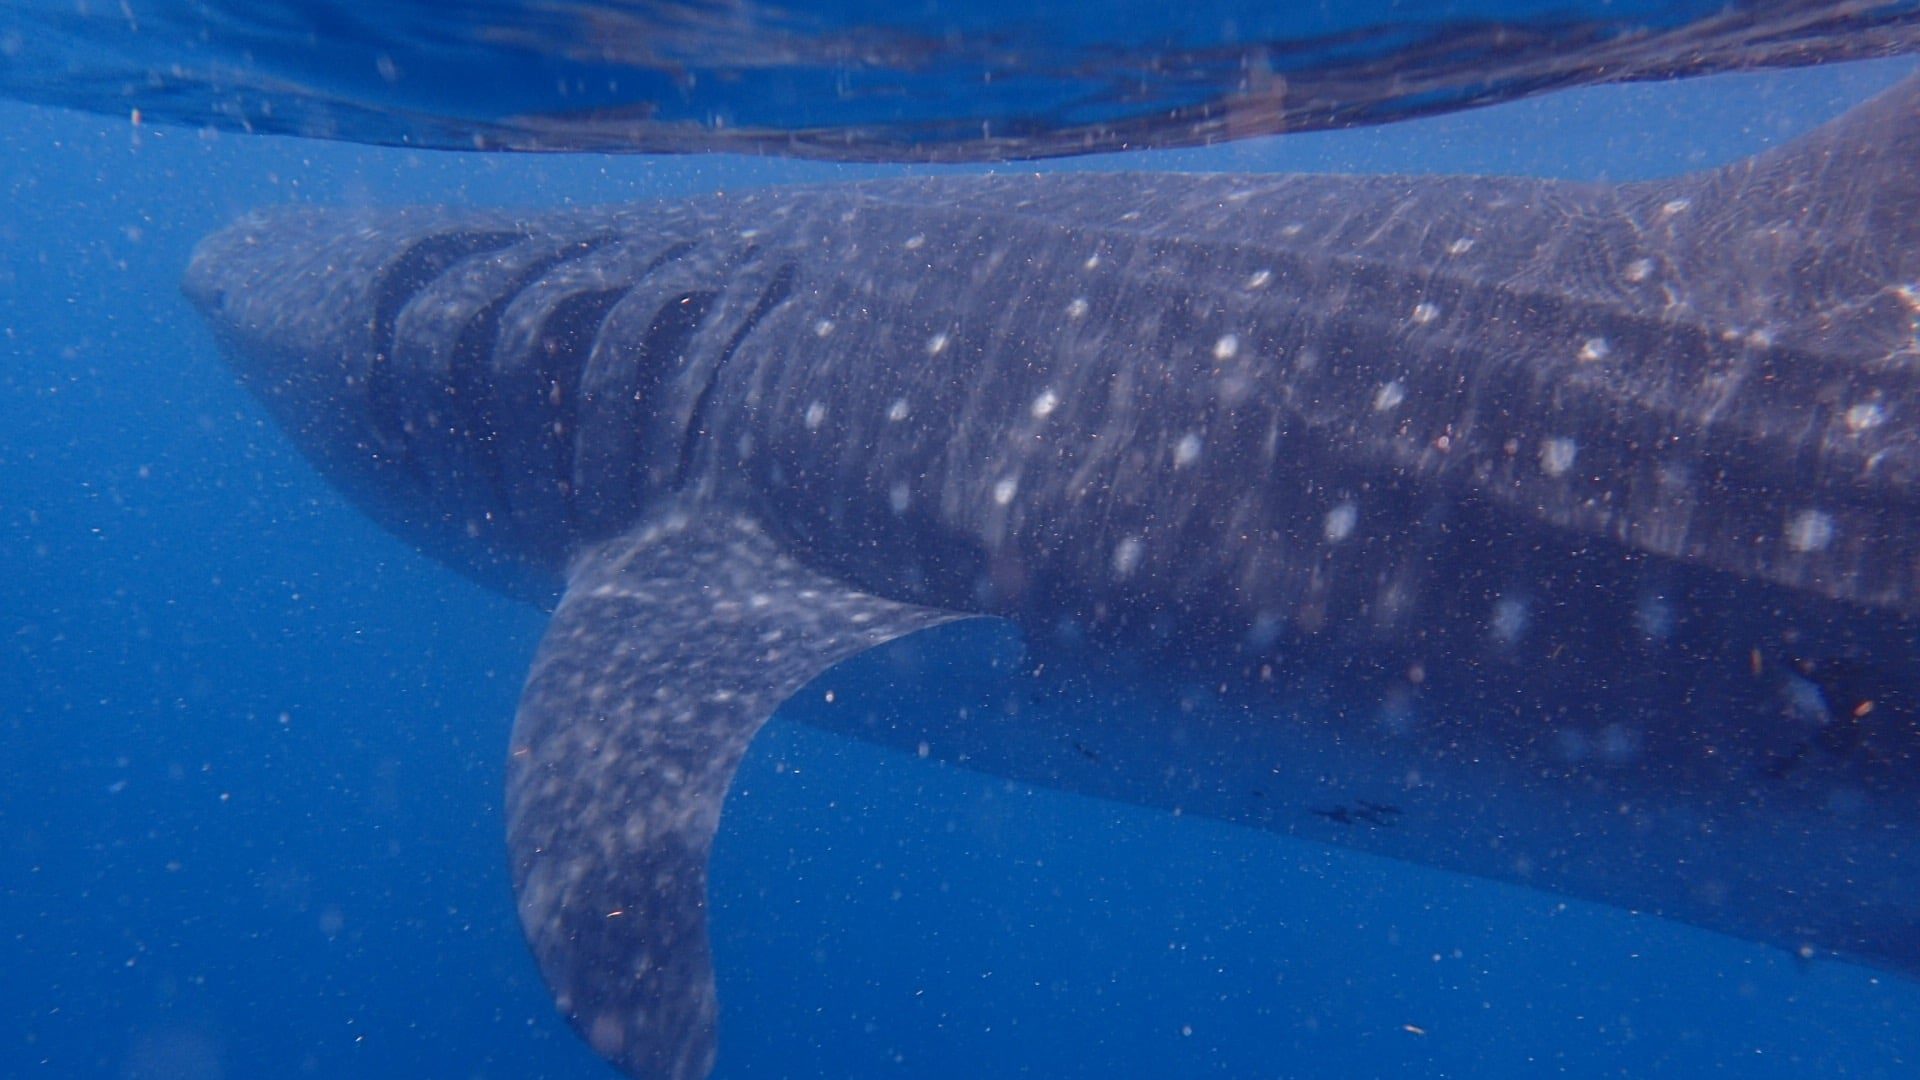 Whale shark up close in blue water of Isla Mujeres, off of Cancun Mexico.